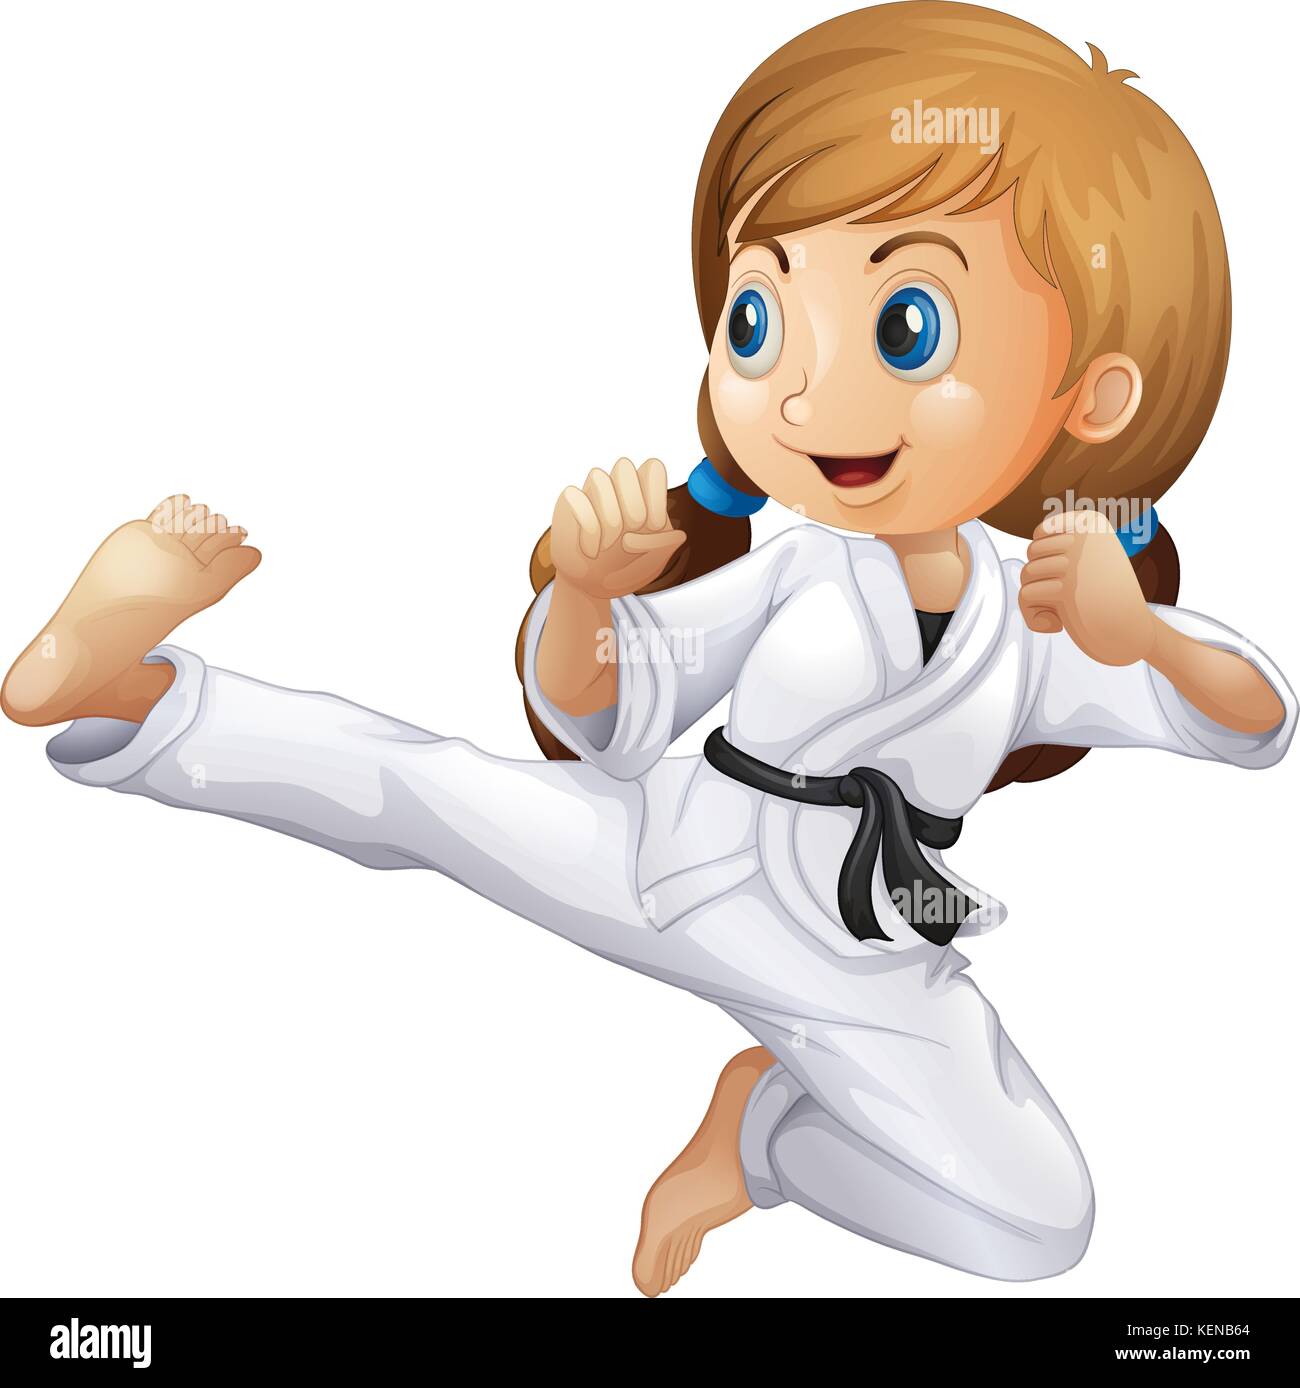 Illustration of a young girl doing karate on a white background Stock Vector